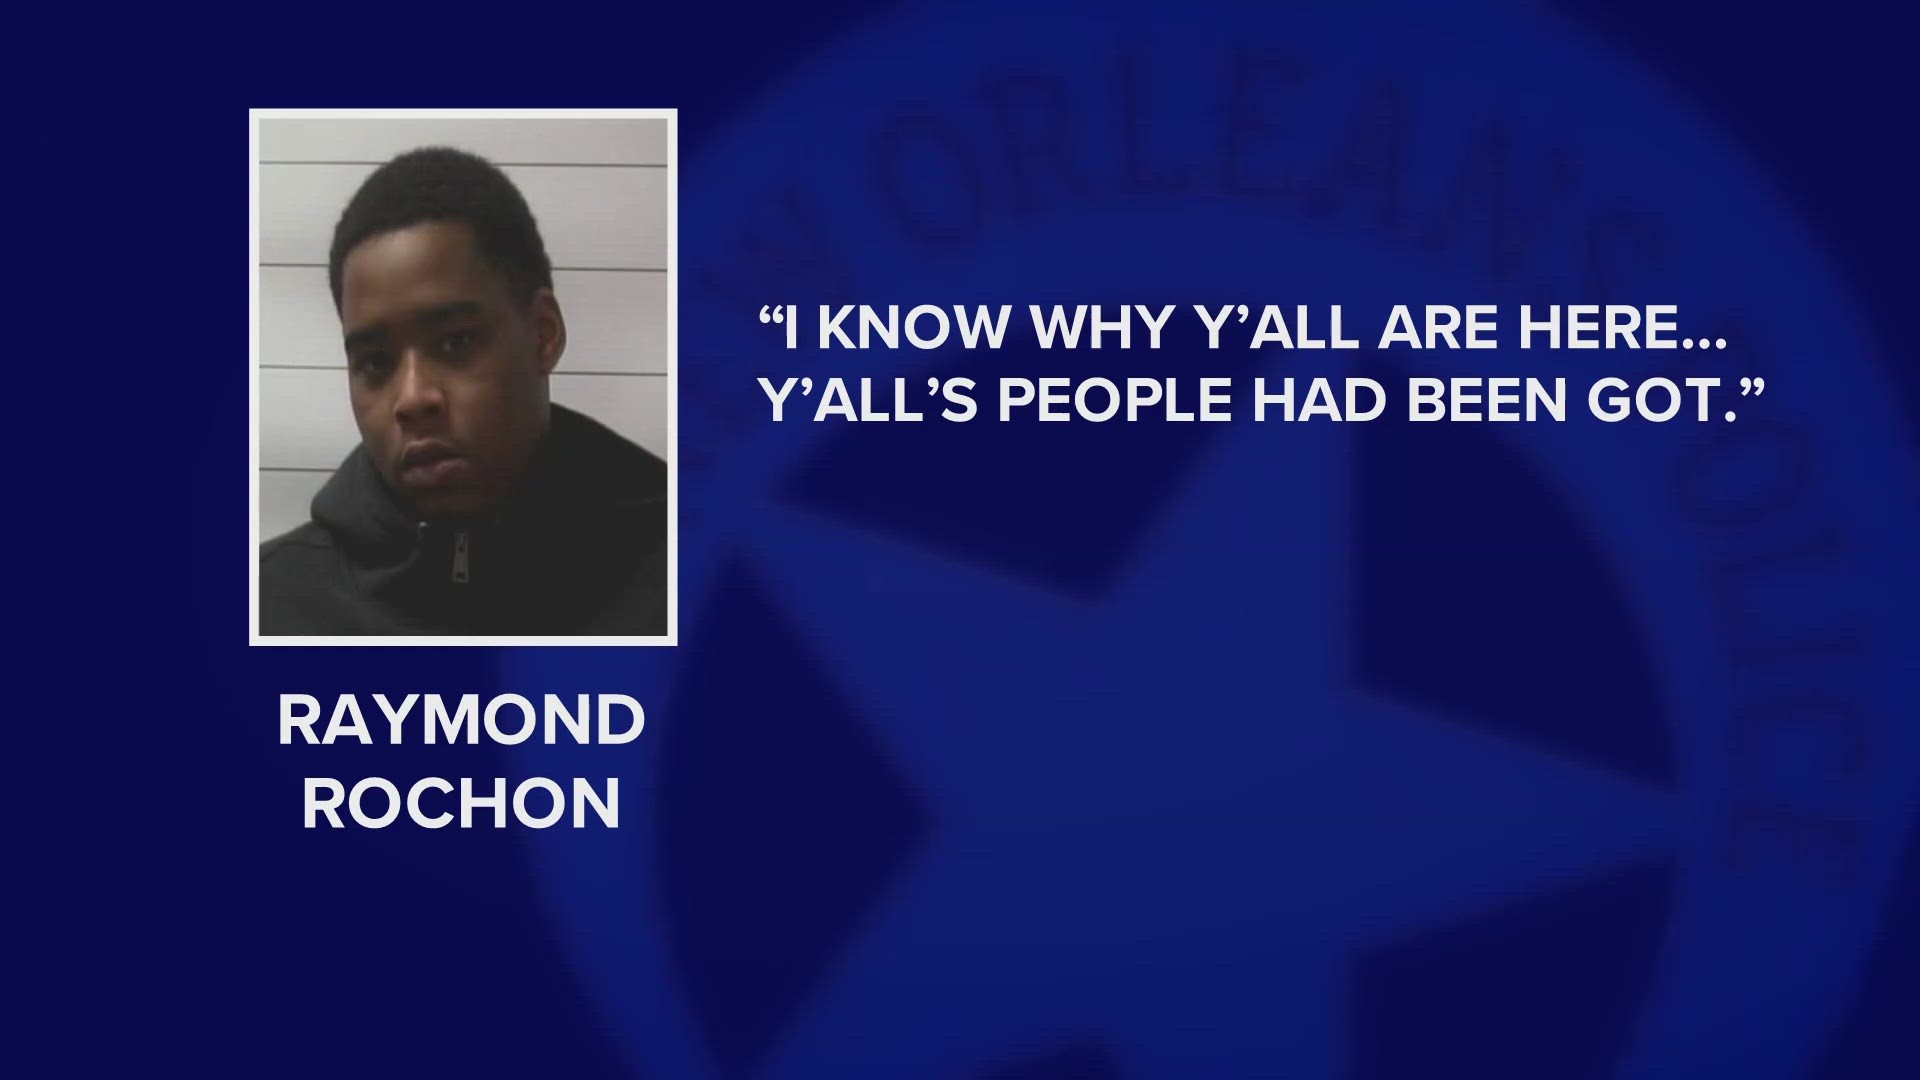 Raymond Rochon, 18, was booked on late Wednesday afternoon. His bond is set at $120,000.